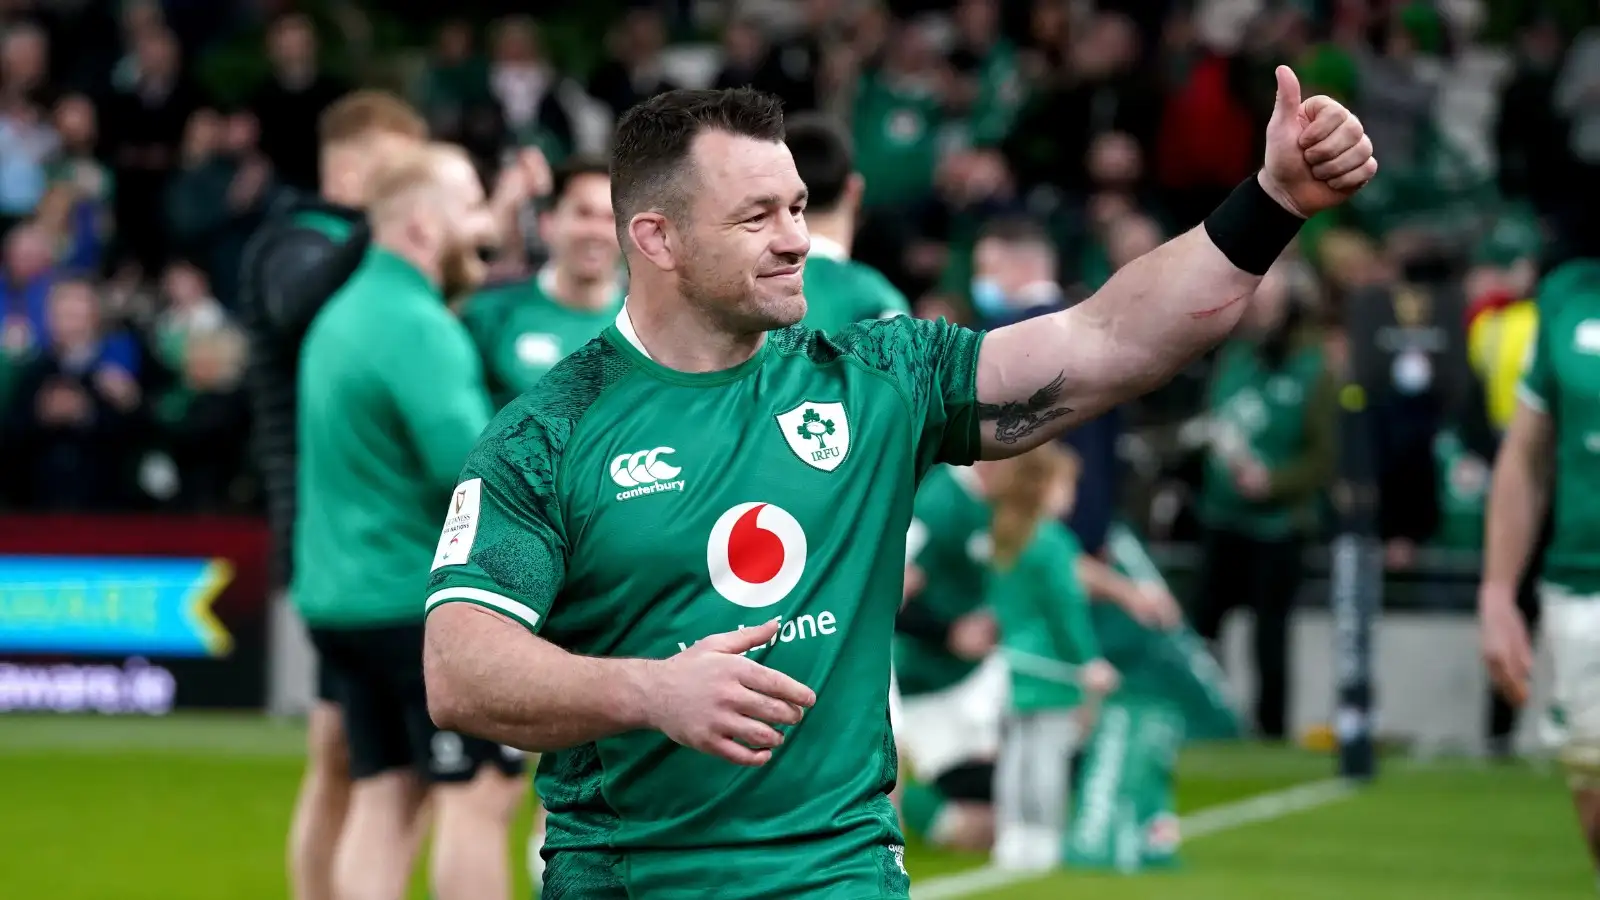 Explained: Why Cian Healy was allowed to scrum at hooker for Ireland six nations scotland